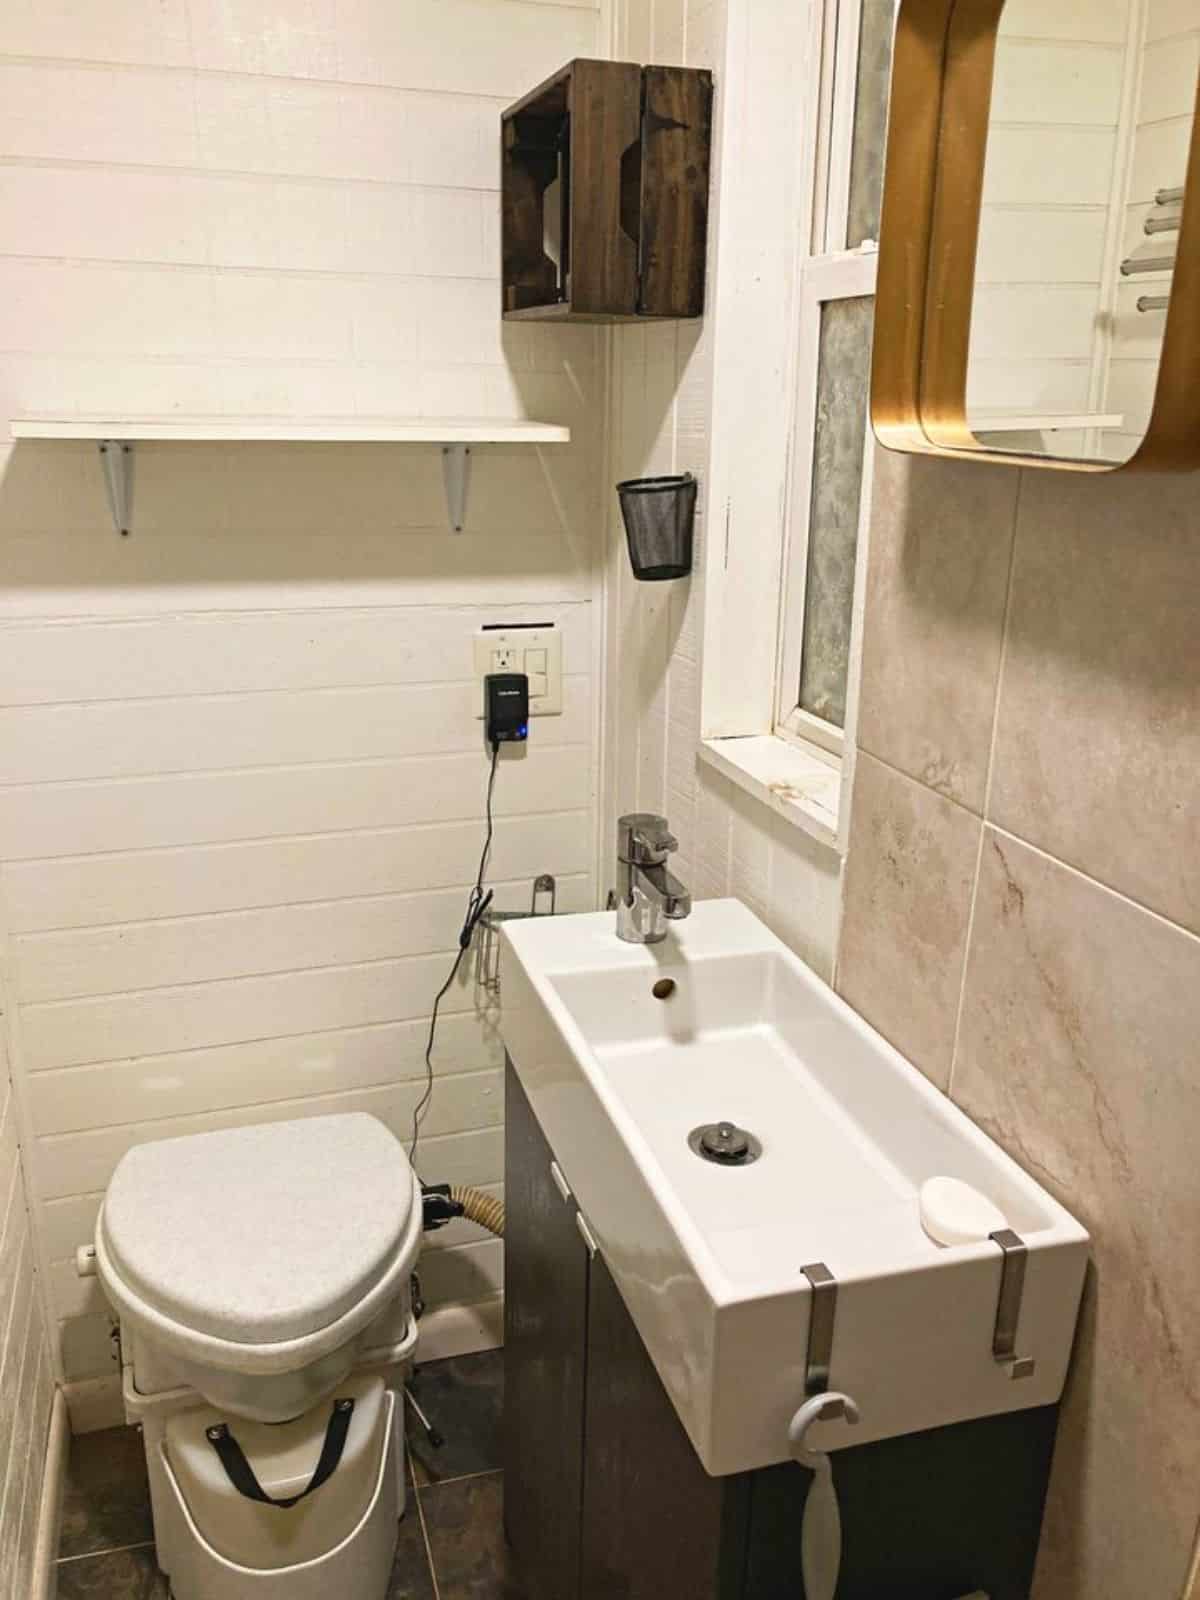 Sink with mirror and standard toilet in bathroom